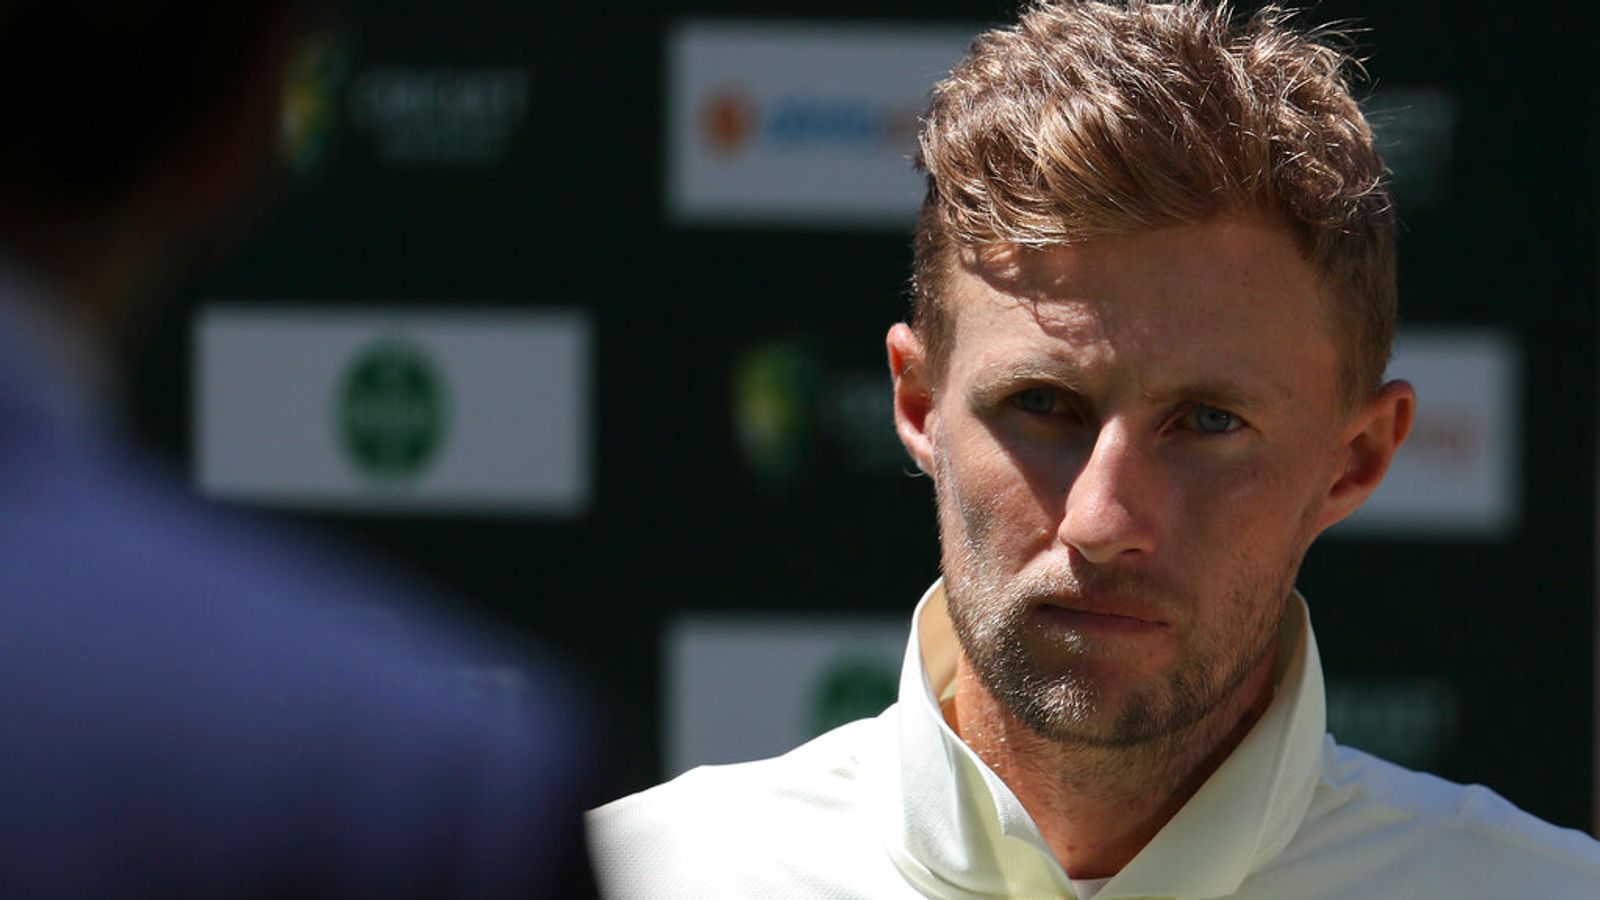 Joe Root tells England ahead of fourth Ashes Test against Australia: ‘Stay together – it would be easy to get fractious’